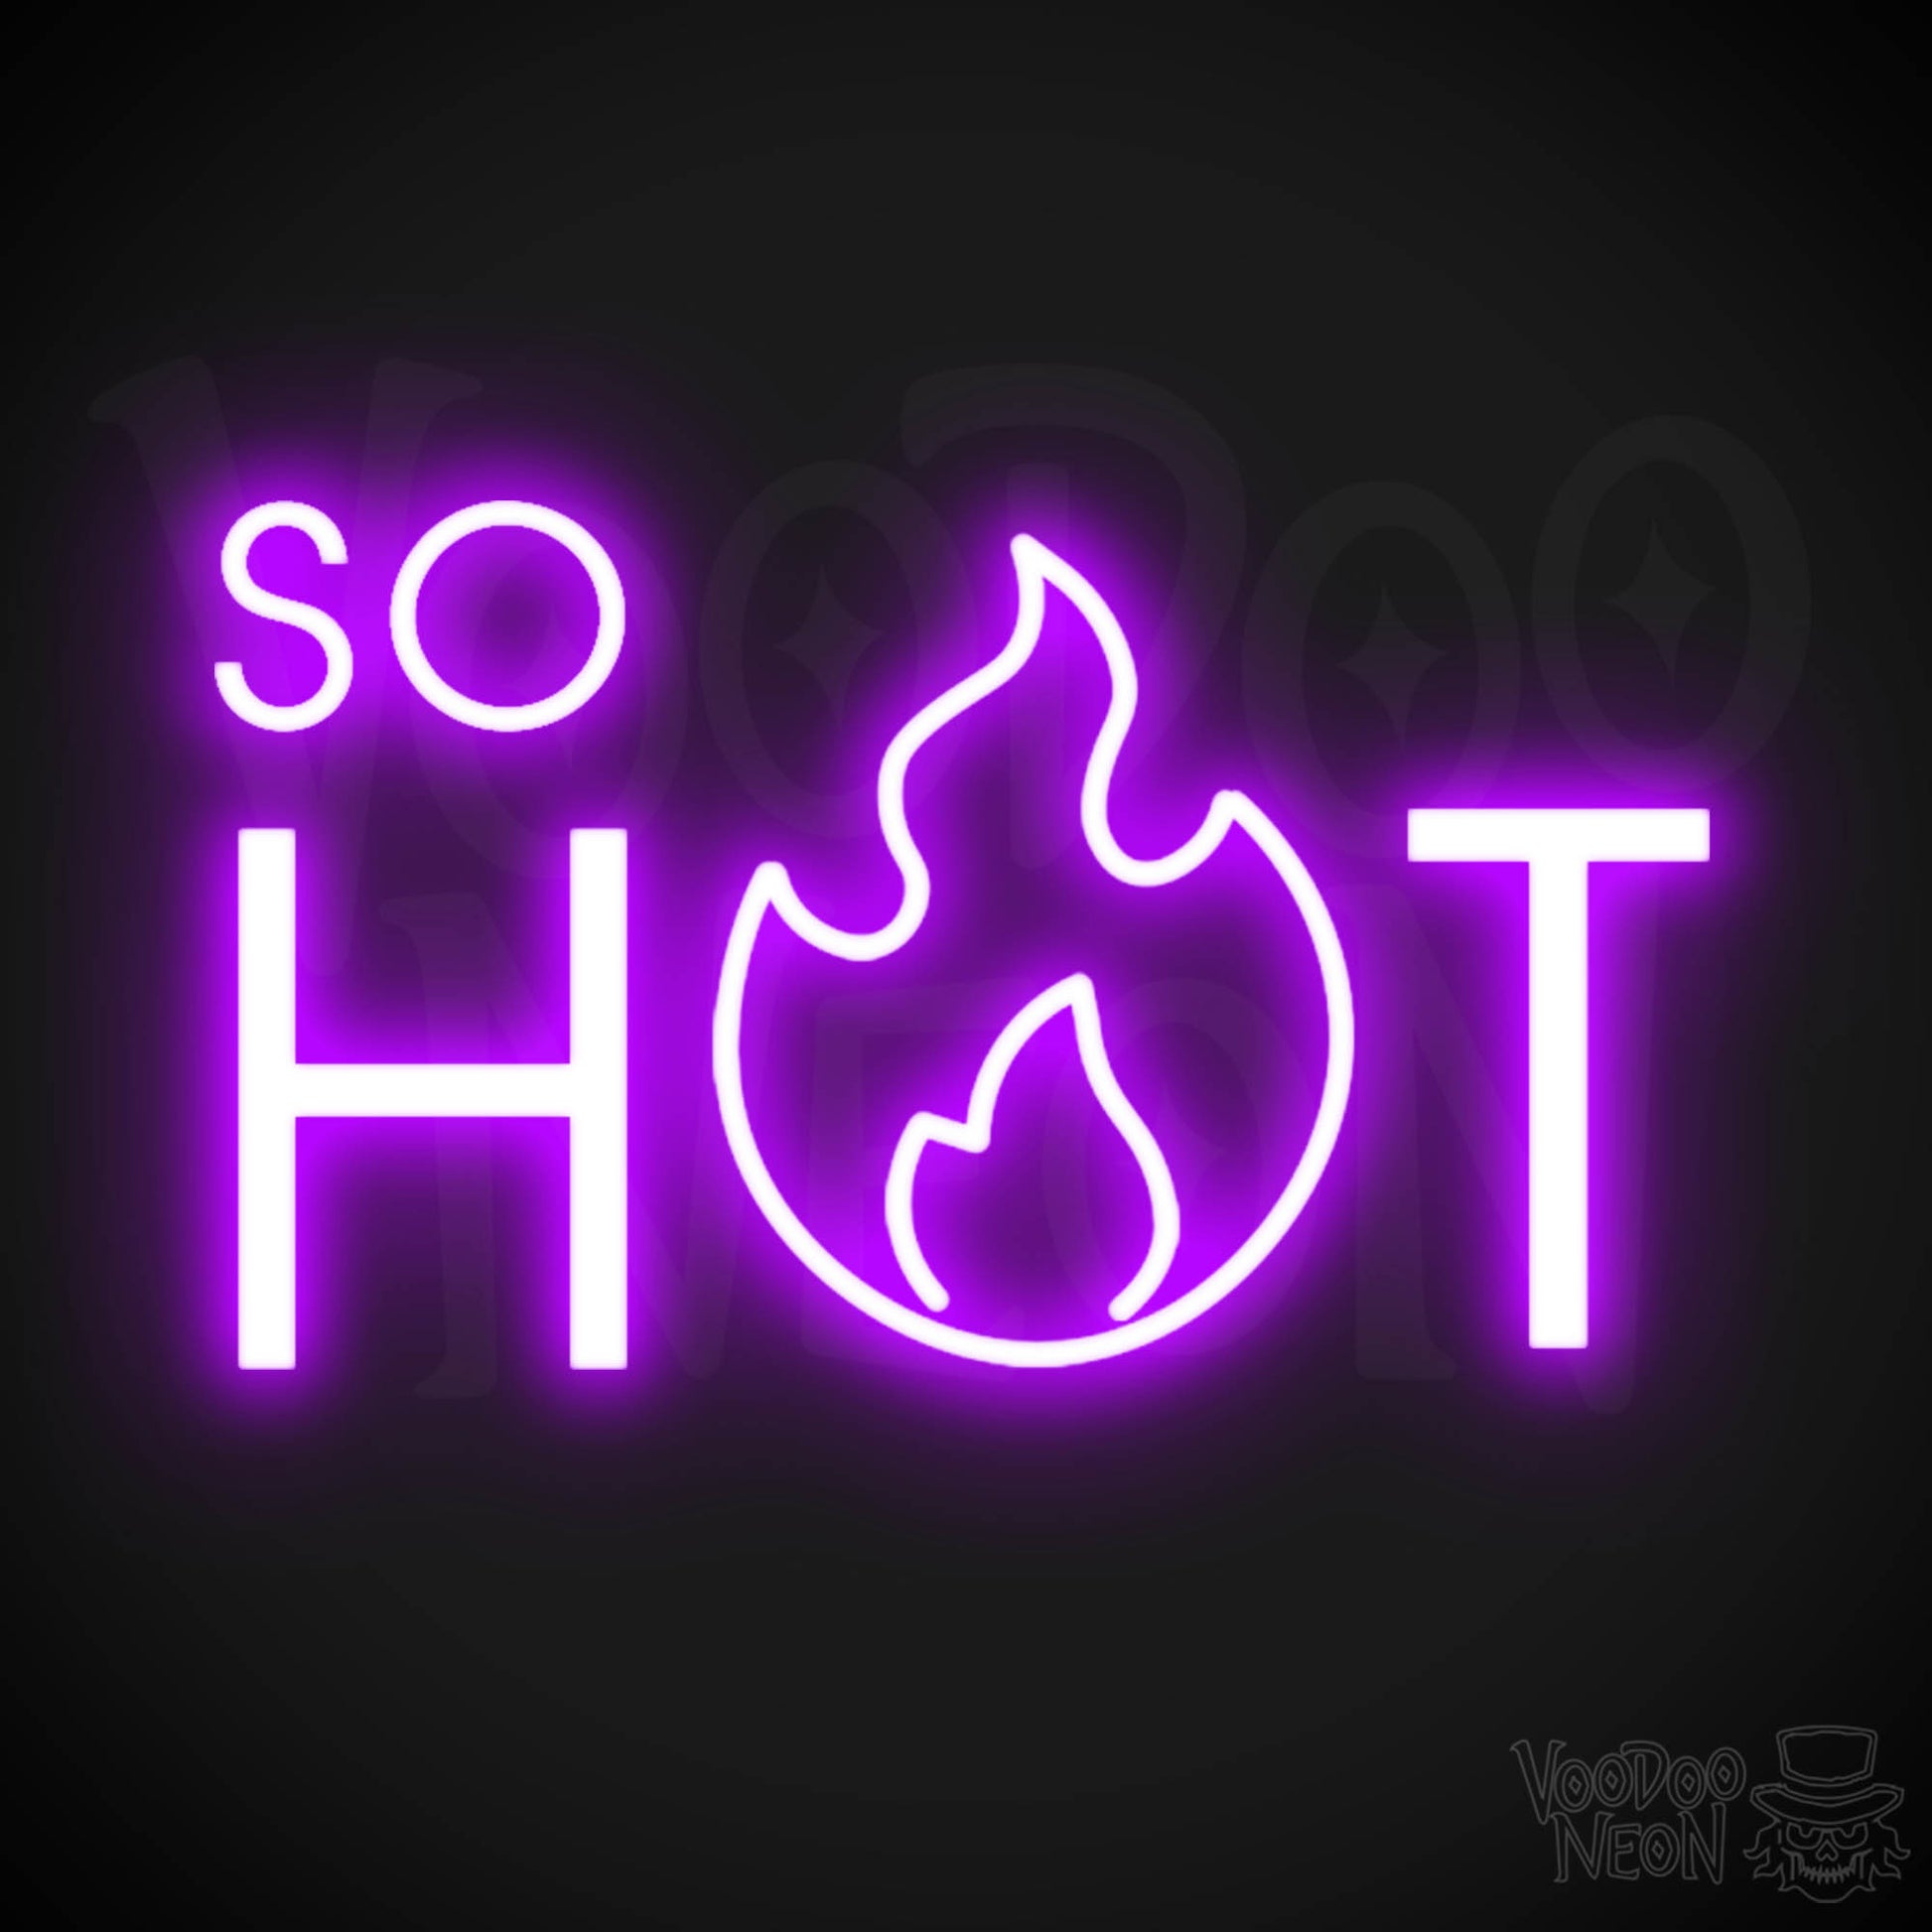 So Hot Neon Sign - Neon So Hot Sign - LED Neon Wall Art - Color Purple